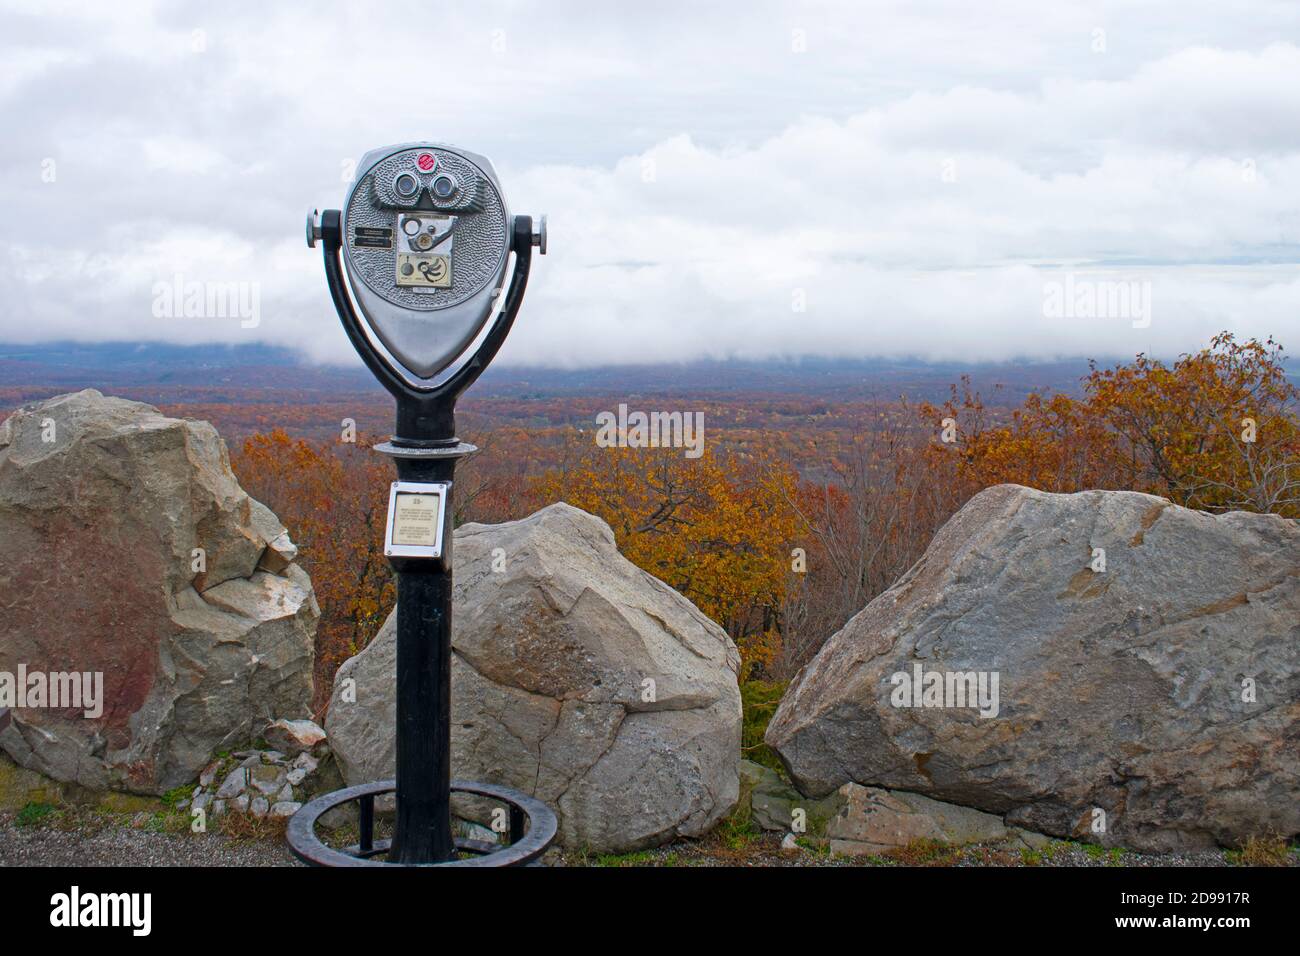 Cloudy skies, large stones, and lush Autumn foliage at High Point Monument area of High Point State Park in New Jersey, USA -02 Stock Photo